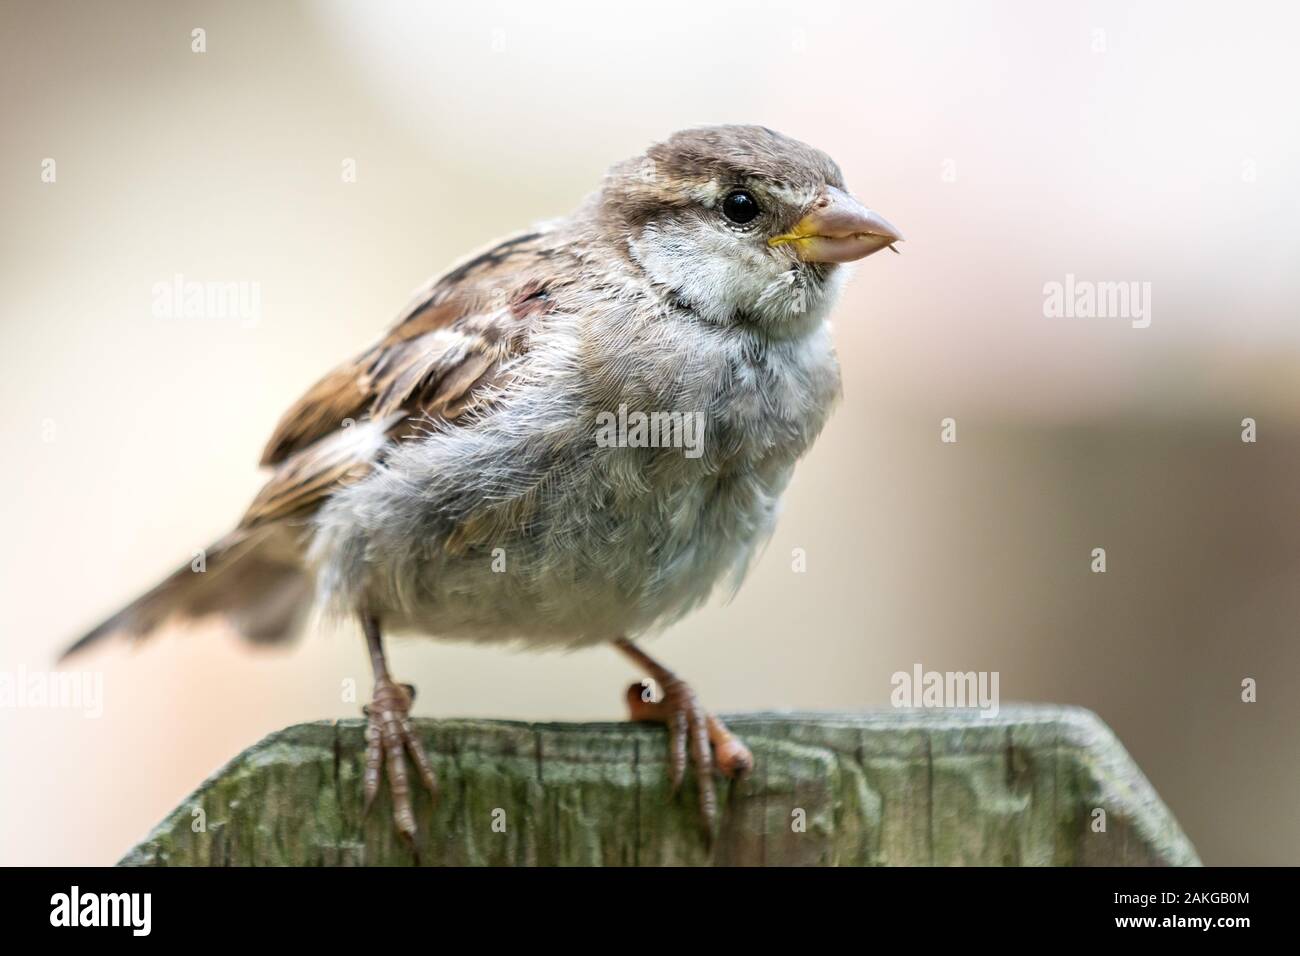 Close up of a sparrow perched on a wooden fence against a bokeh background Stock Photo